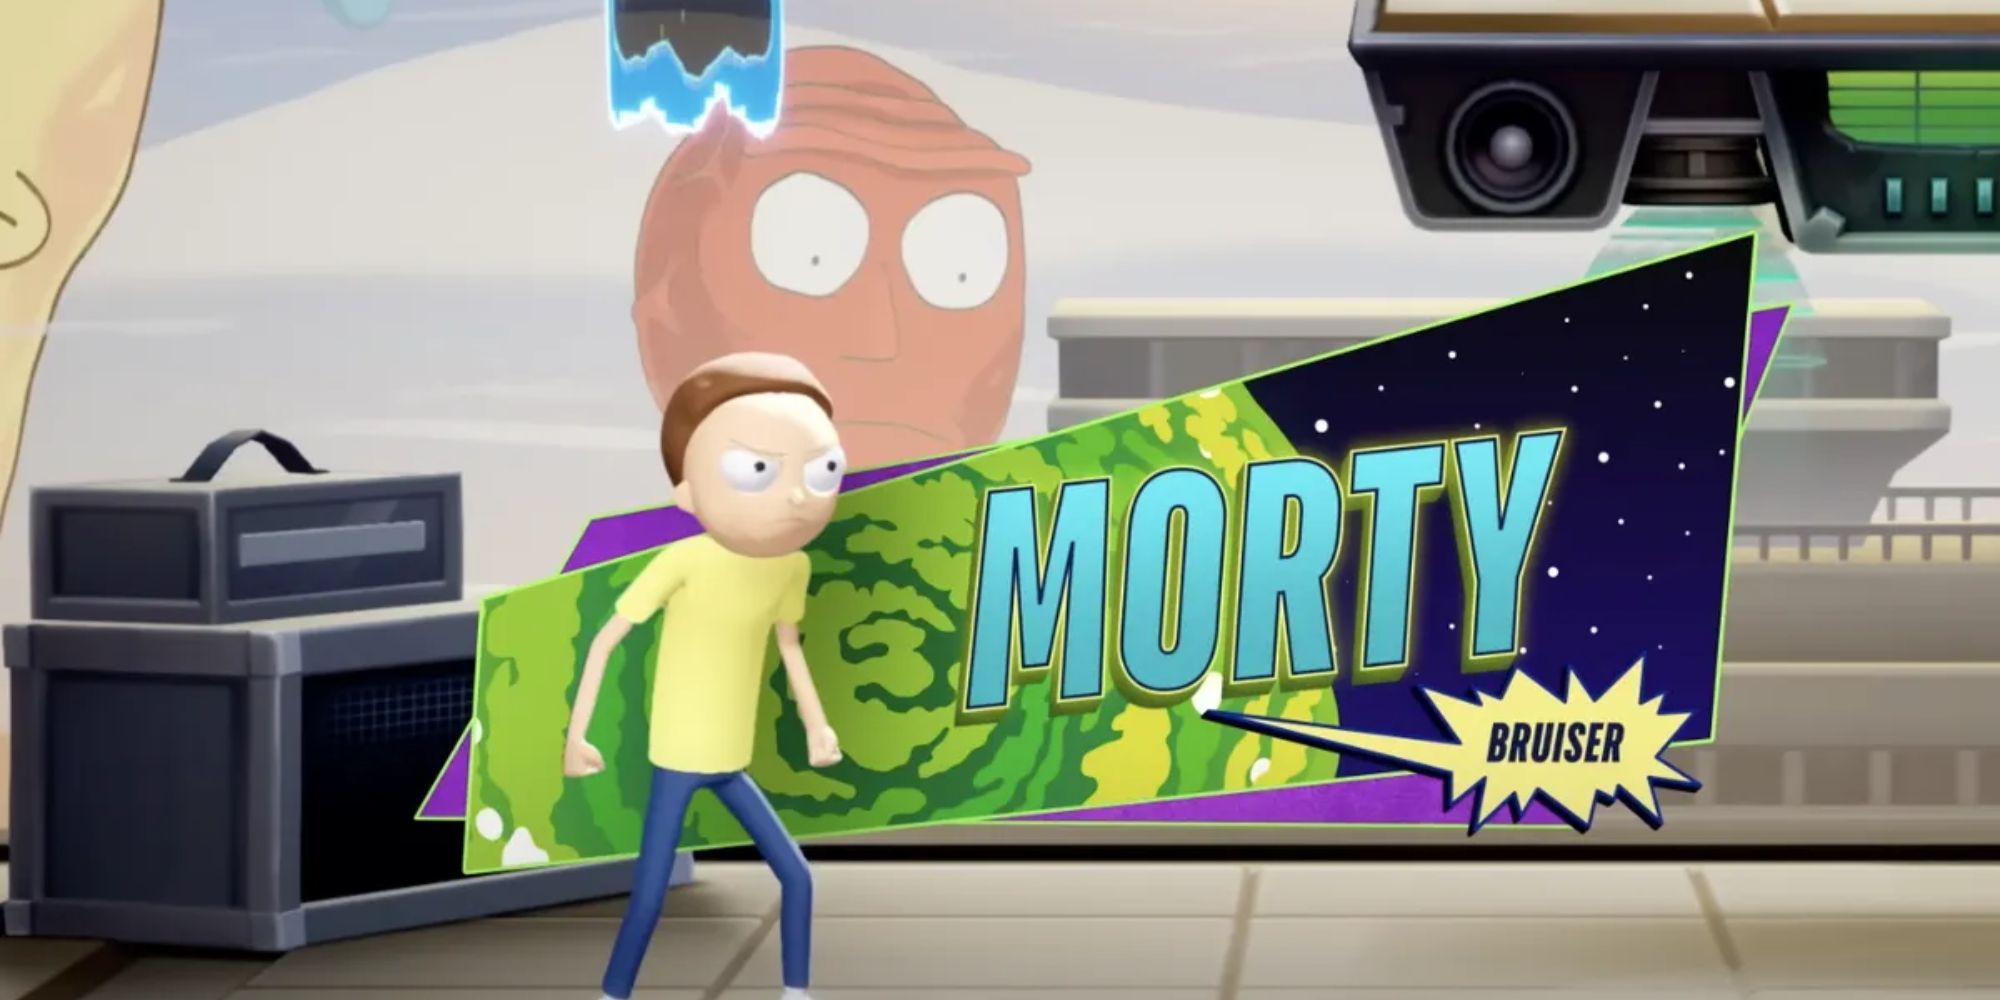 MultiVersus Players Think Morty Should Be A Mage, Not A Bruiser